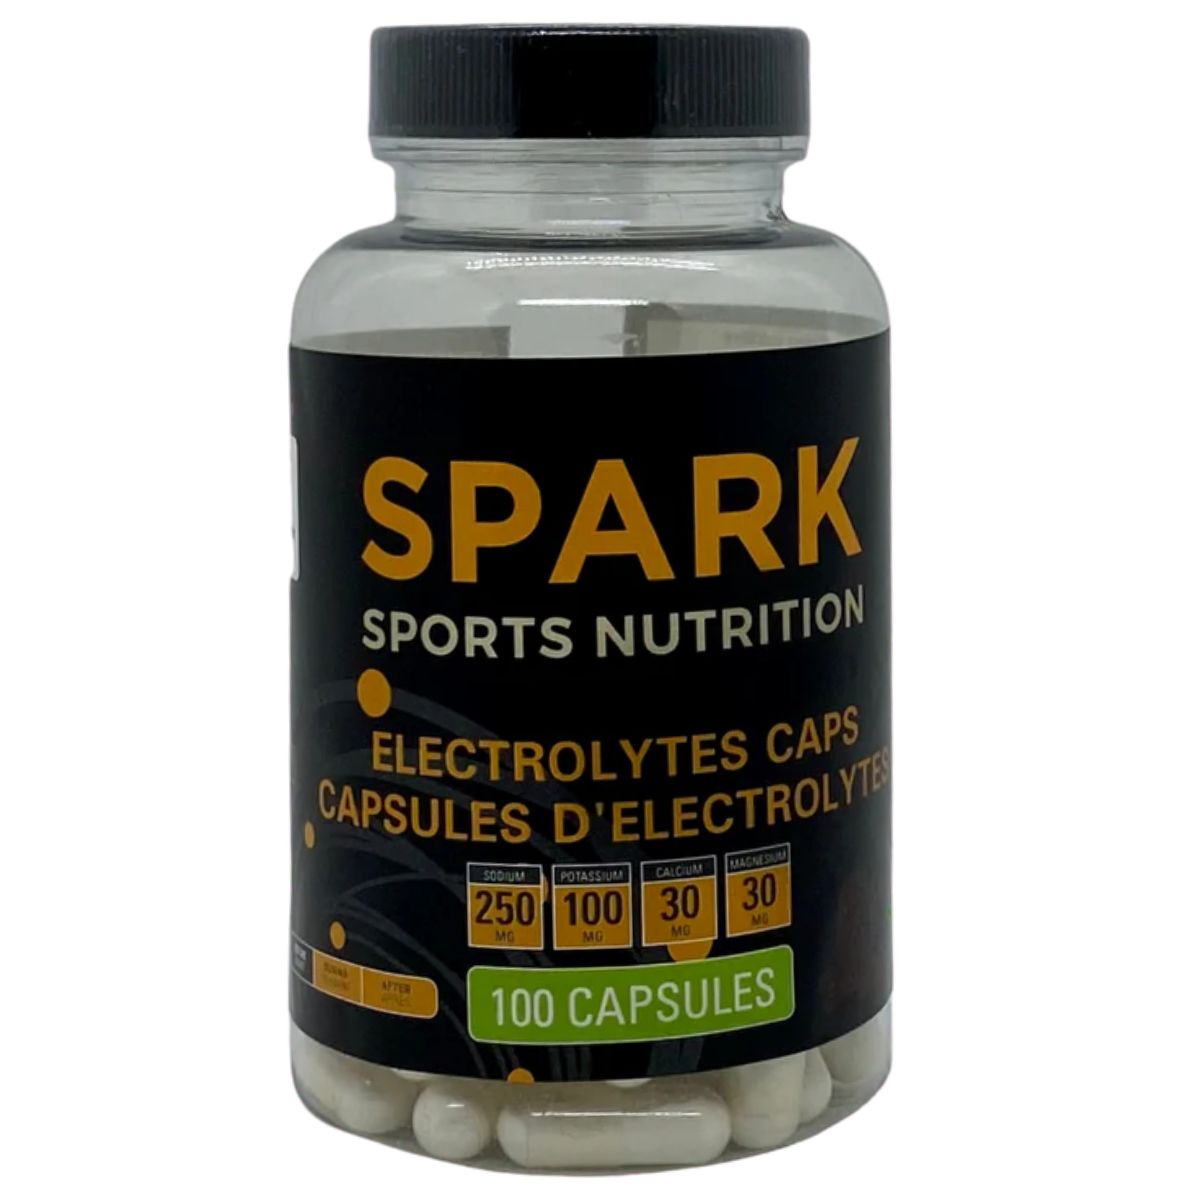 Spark Electrolyte Capsules